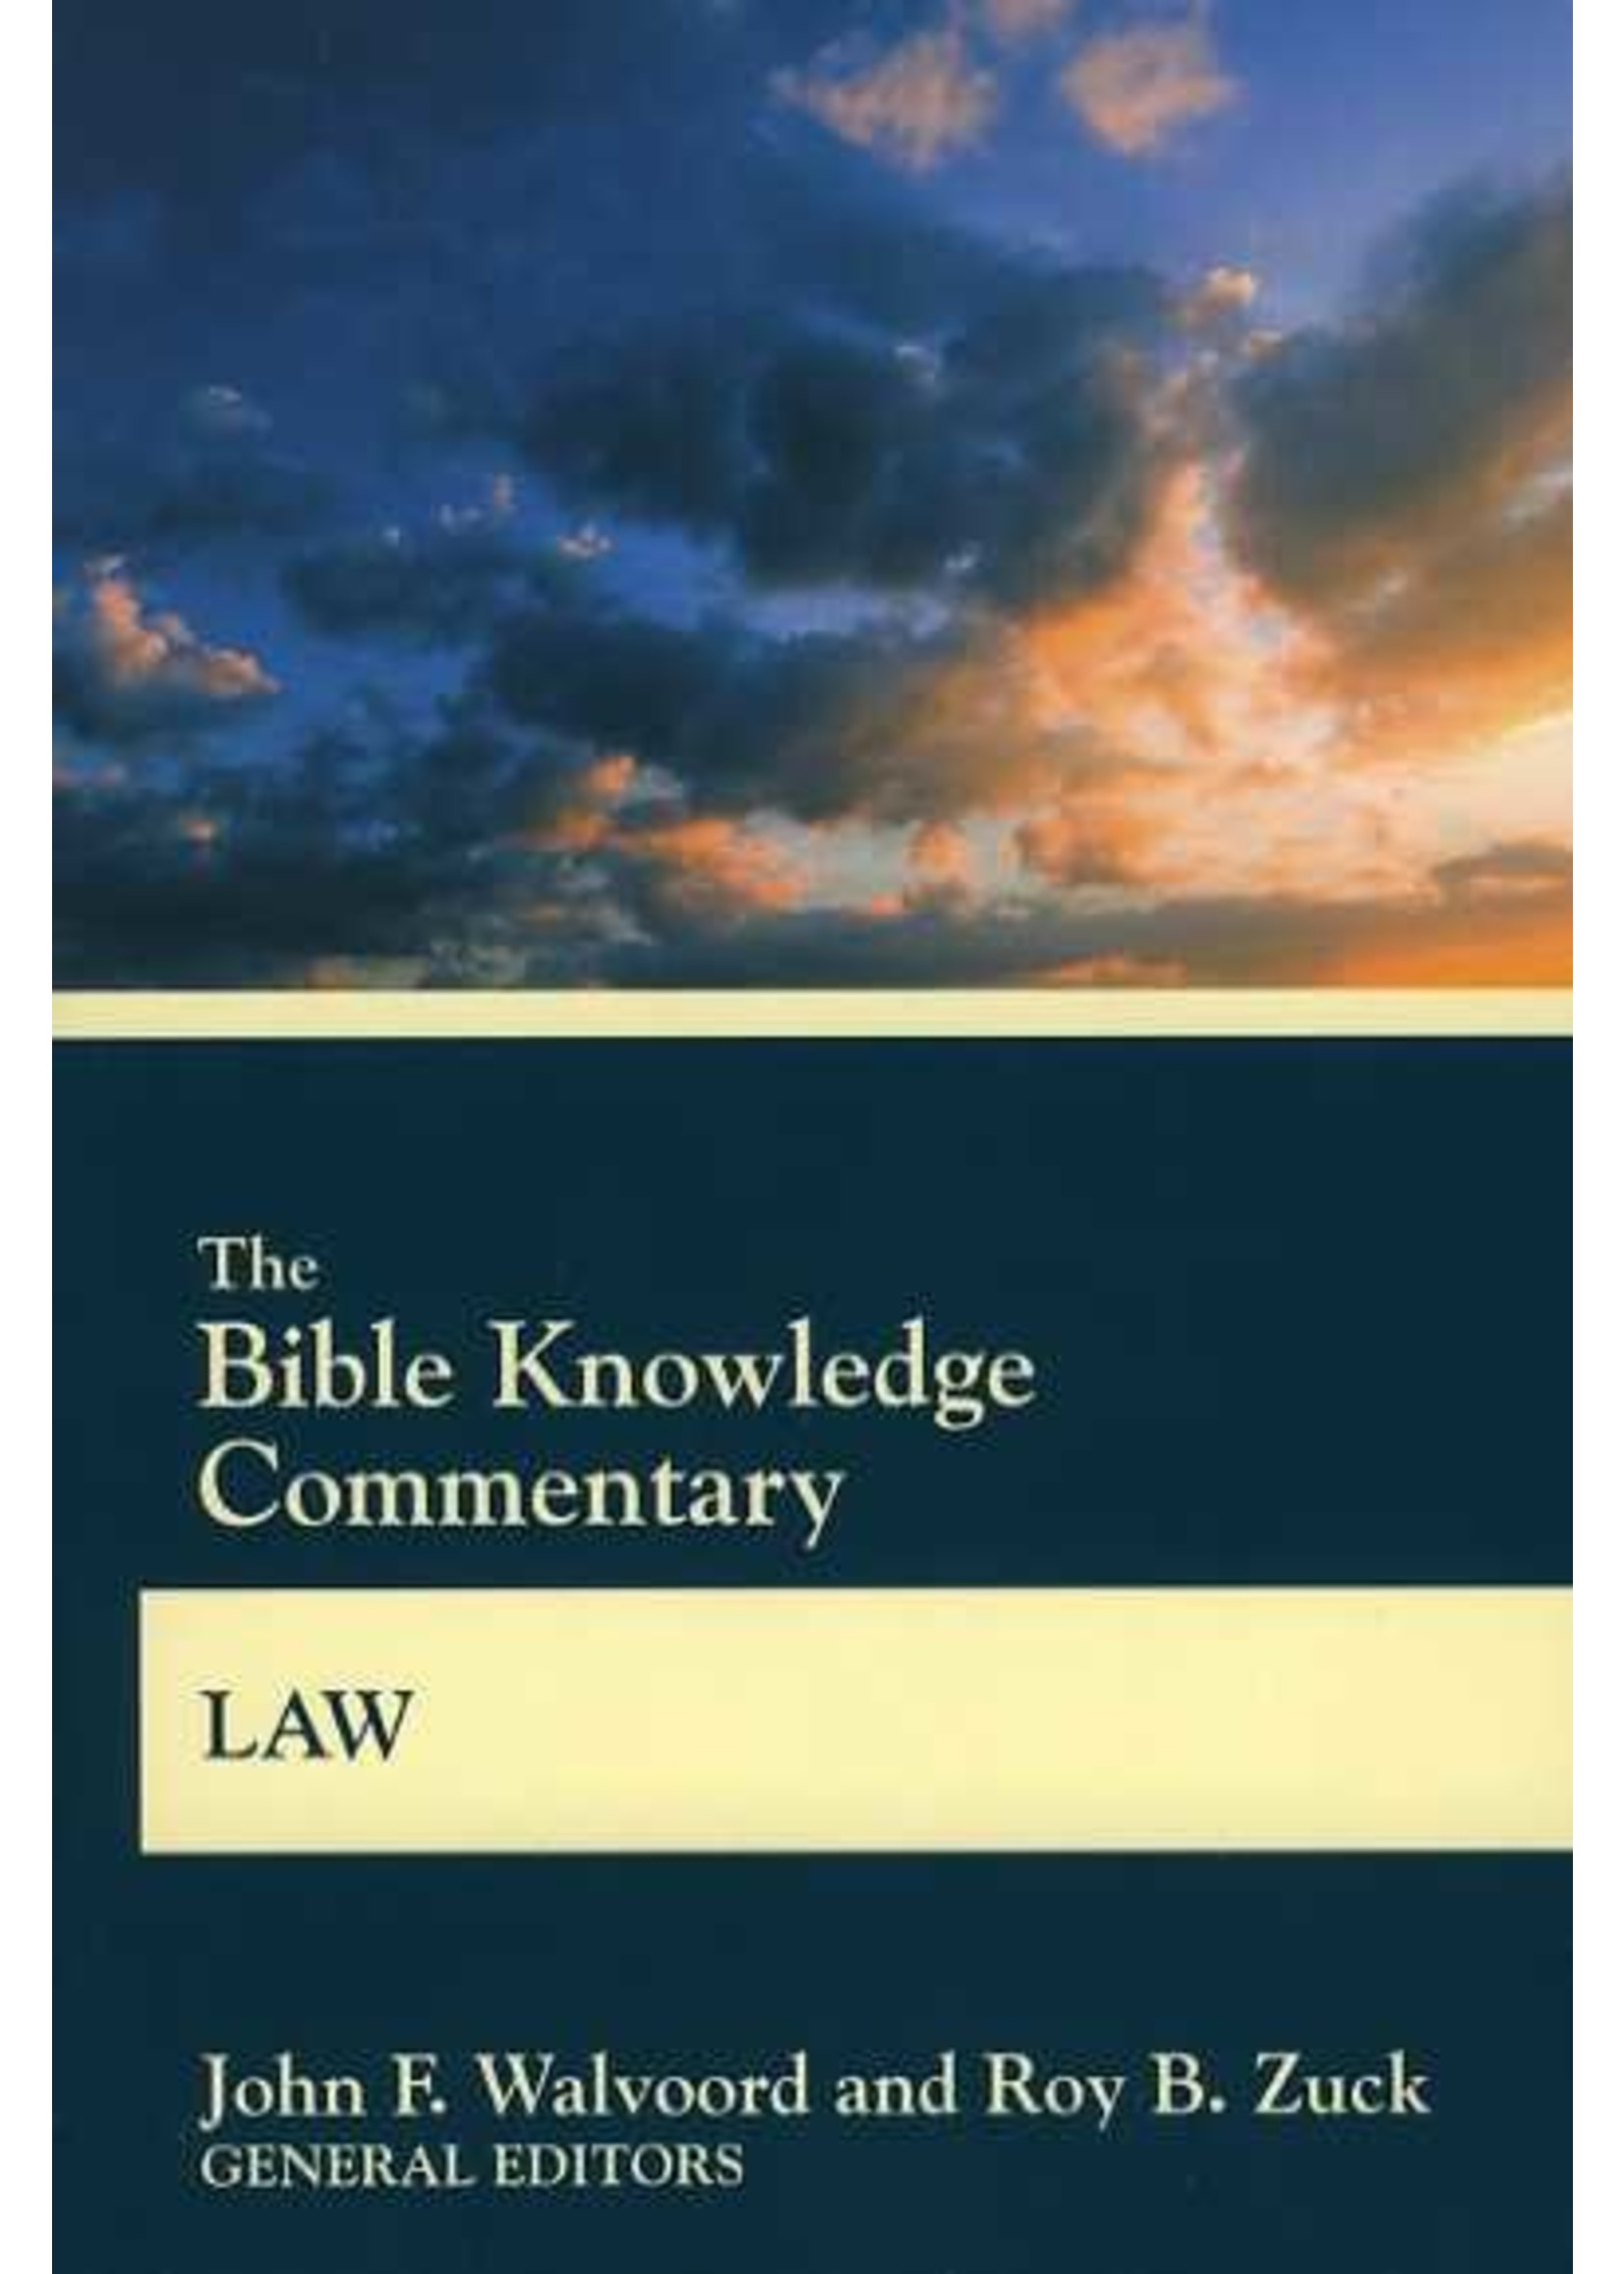 David C. Cook The Bible Knowledge Commentary Law - John F. Walvoord, Roy B. Zuck